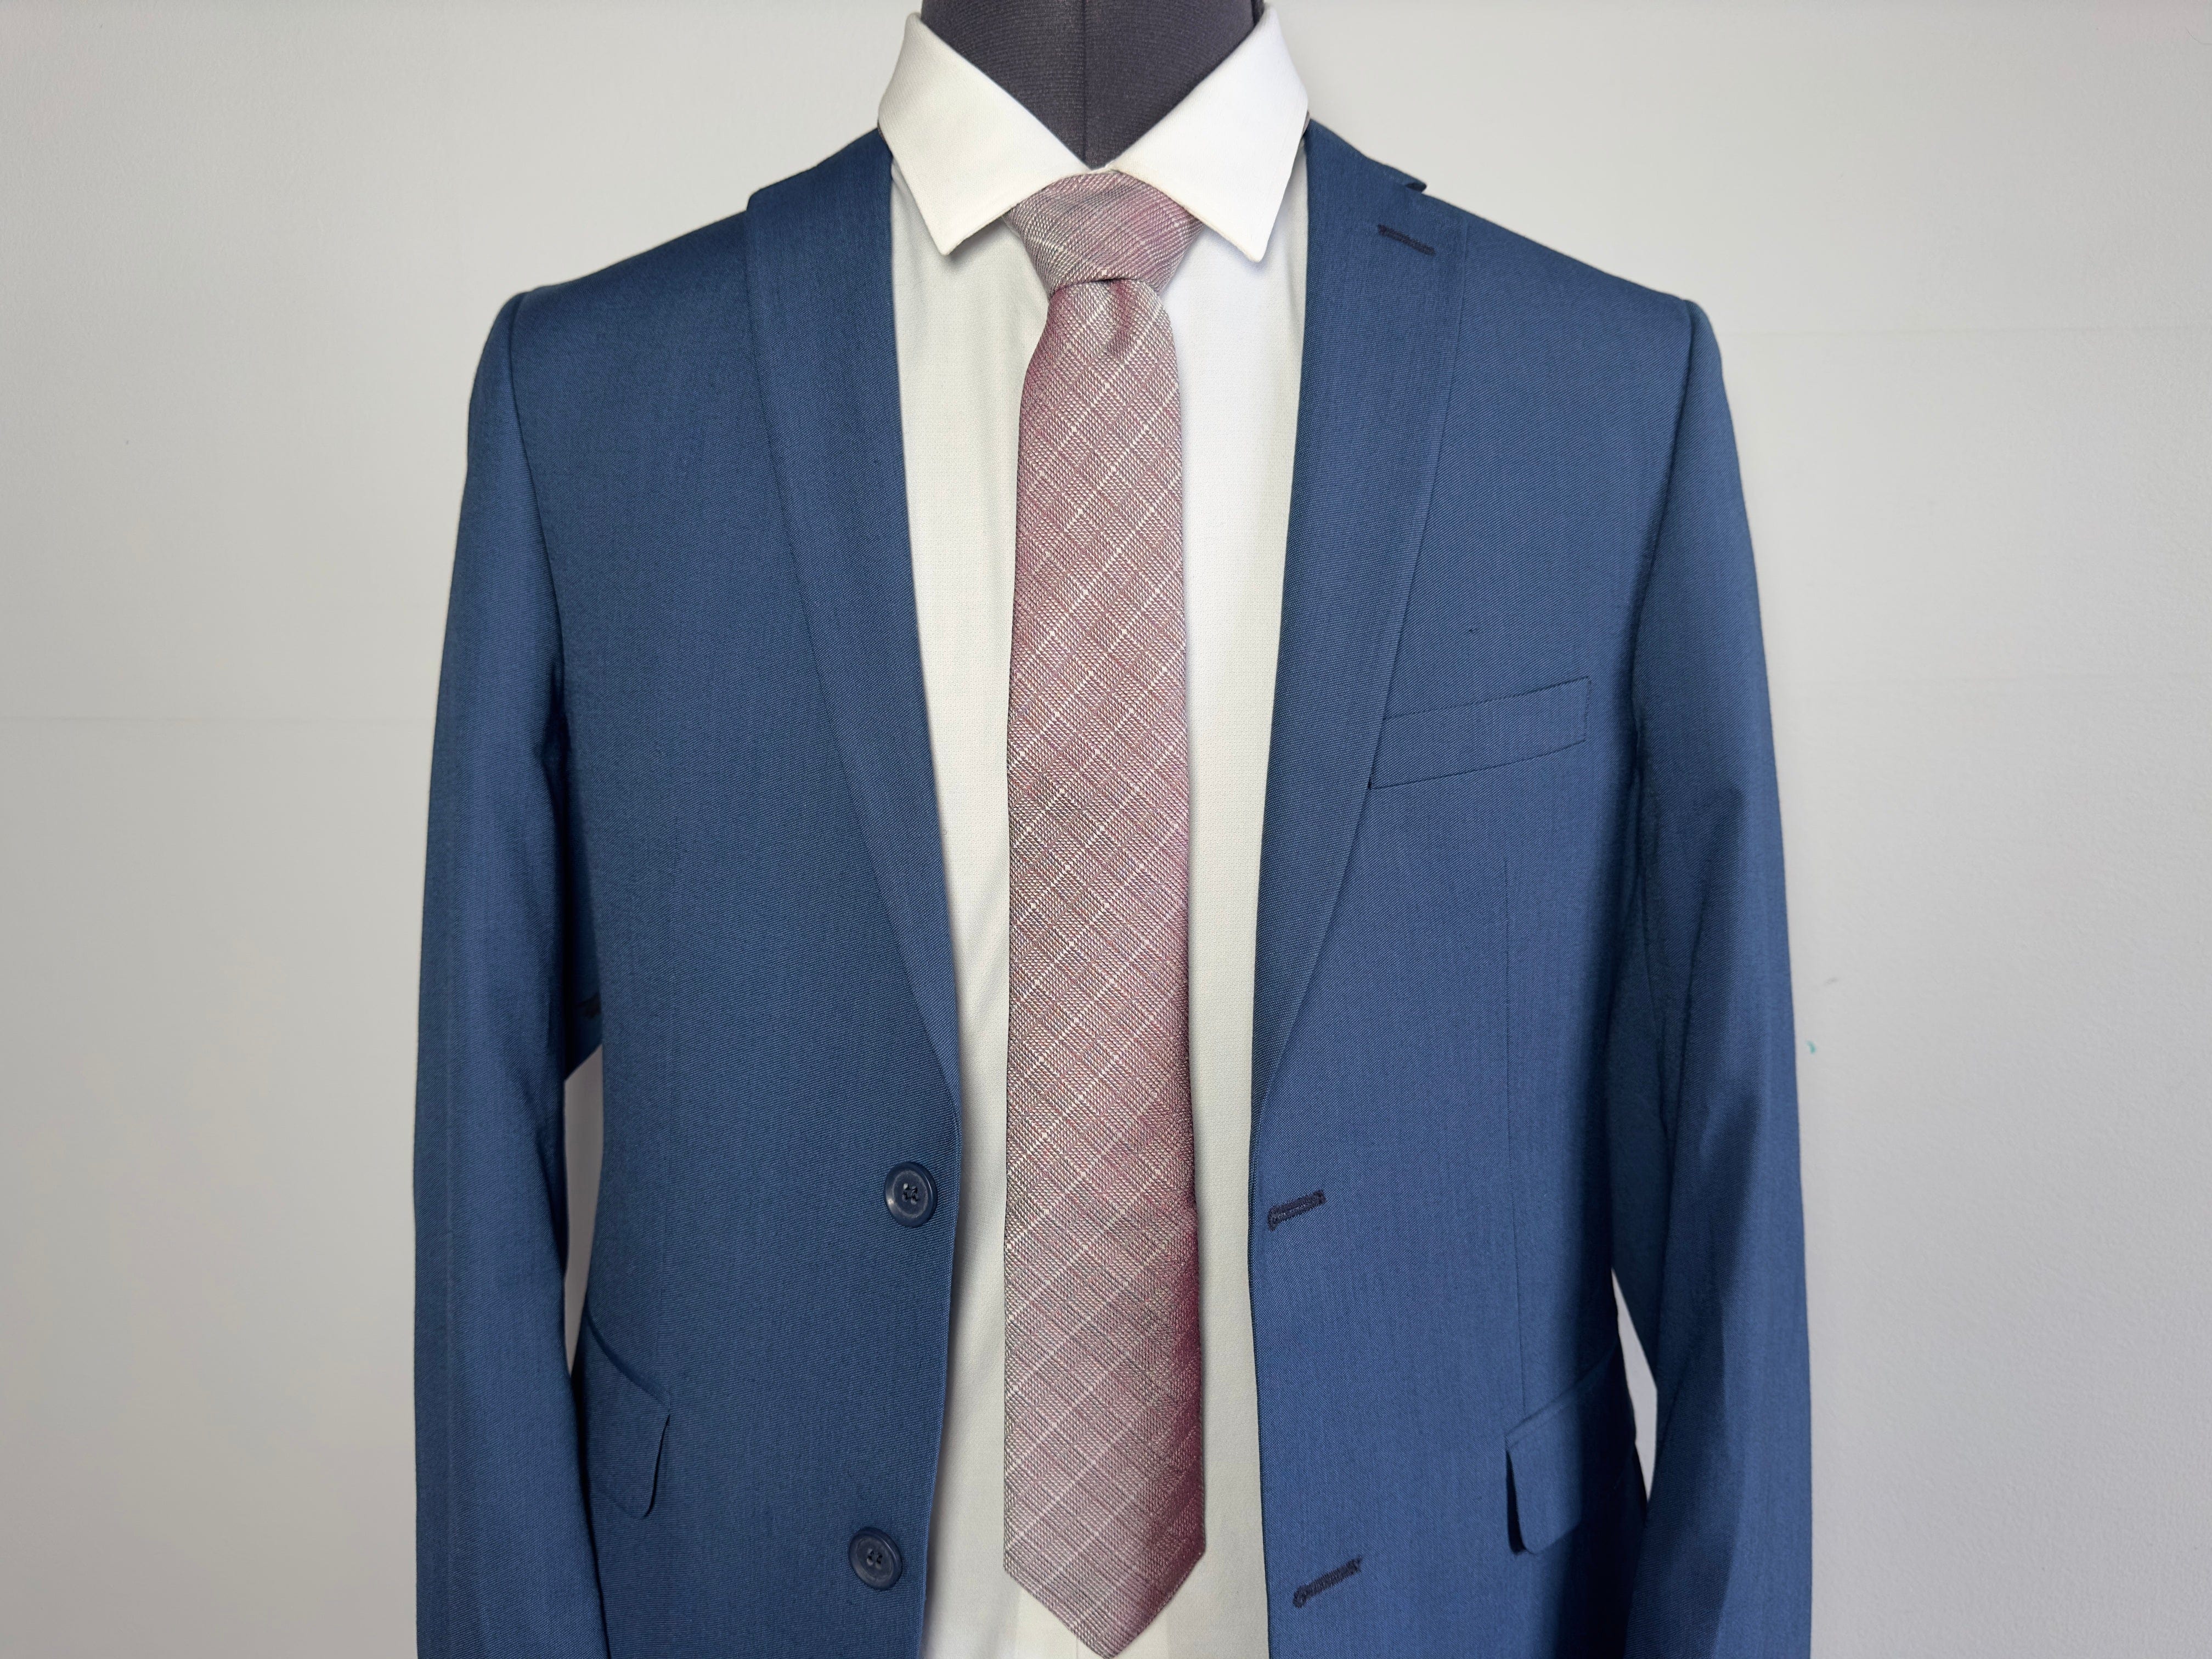 Toulouse Tie - Skinny